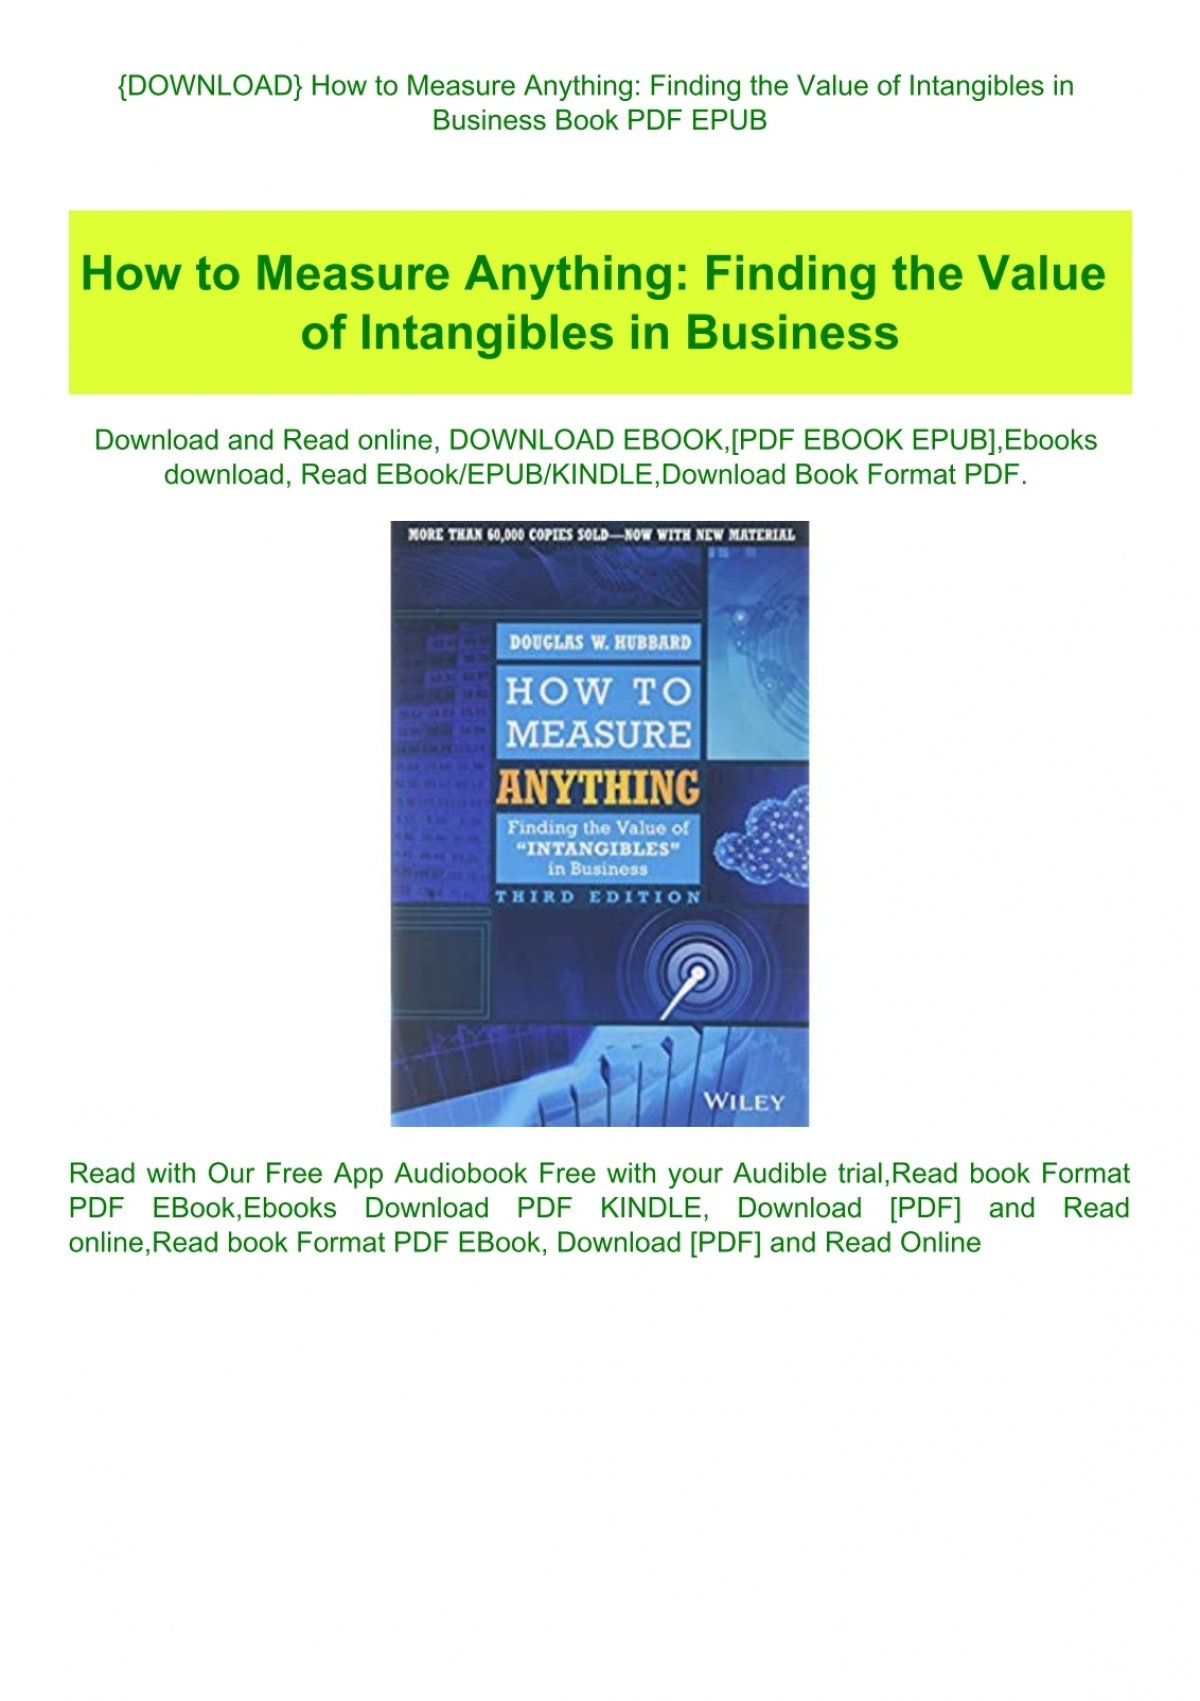 How To Measure Anything Finding The Value Of Intangibles In Business Download Free Ebook